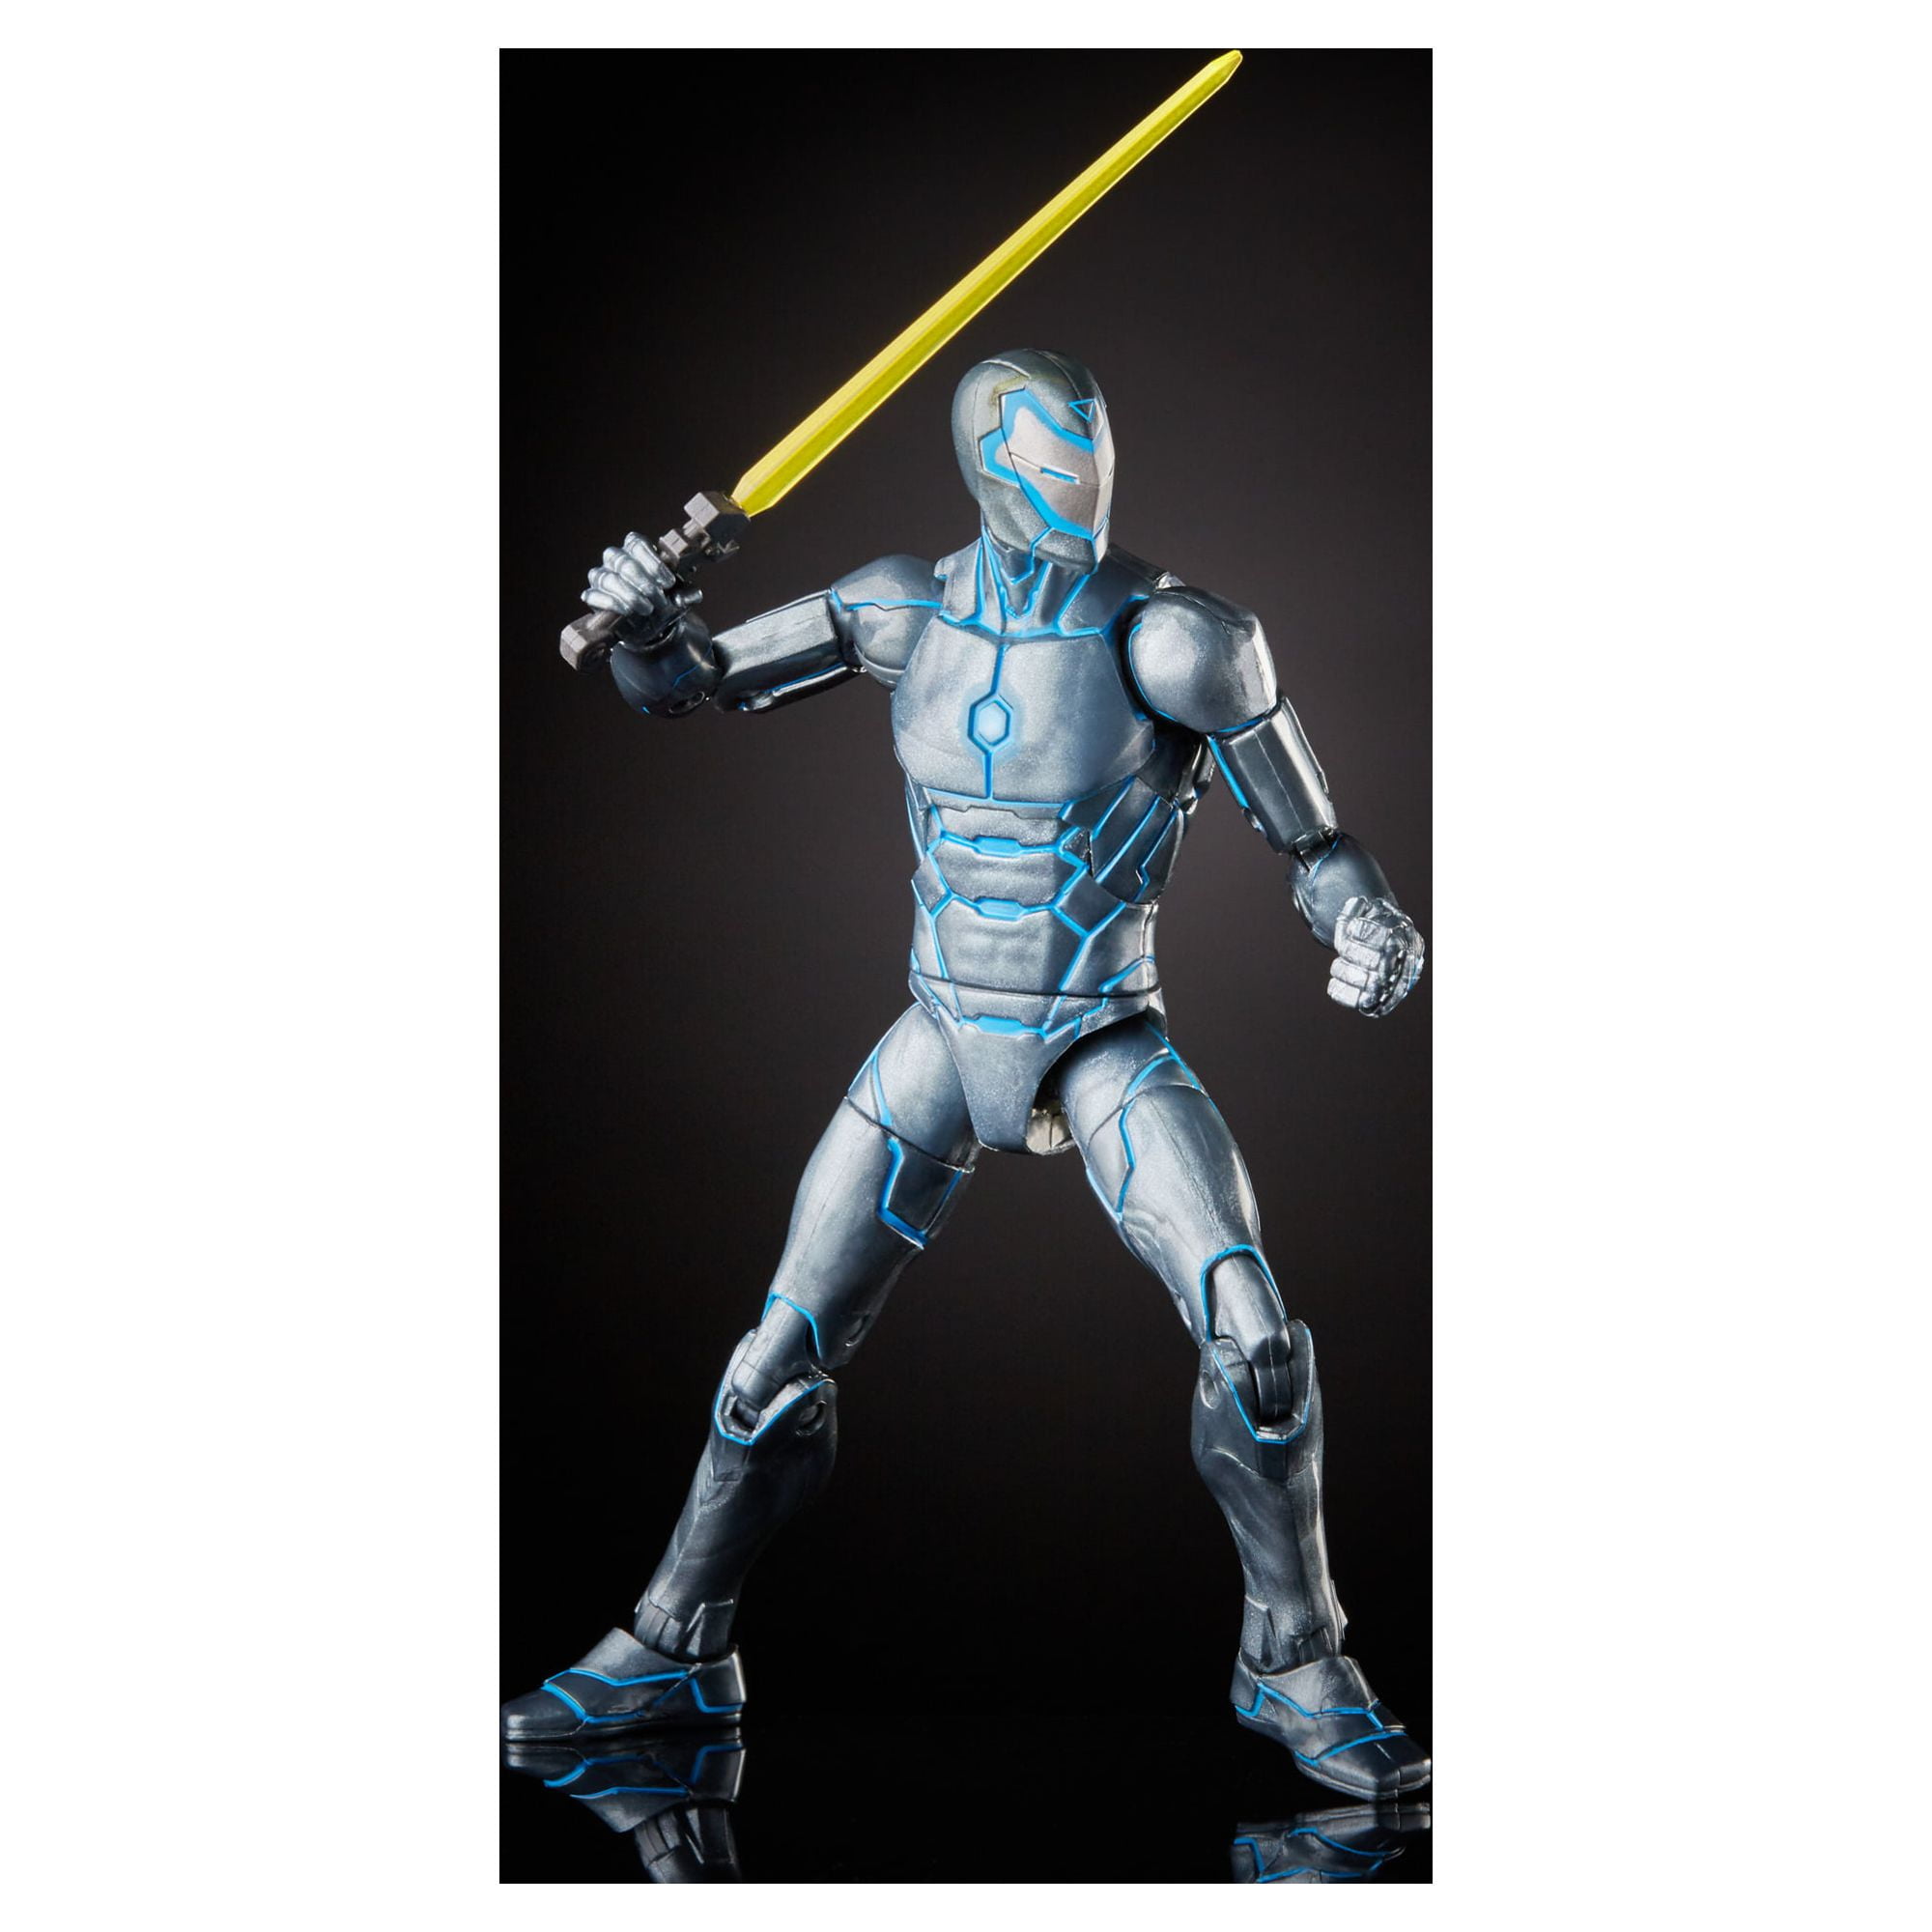 Hasbro Marvel Legends Series 6-inch Collectible Action Figure